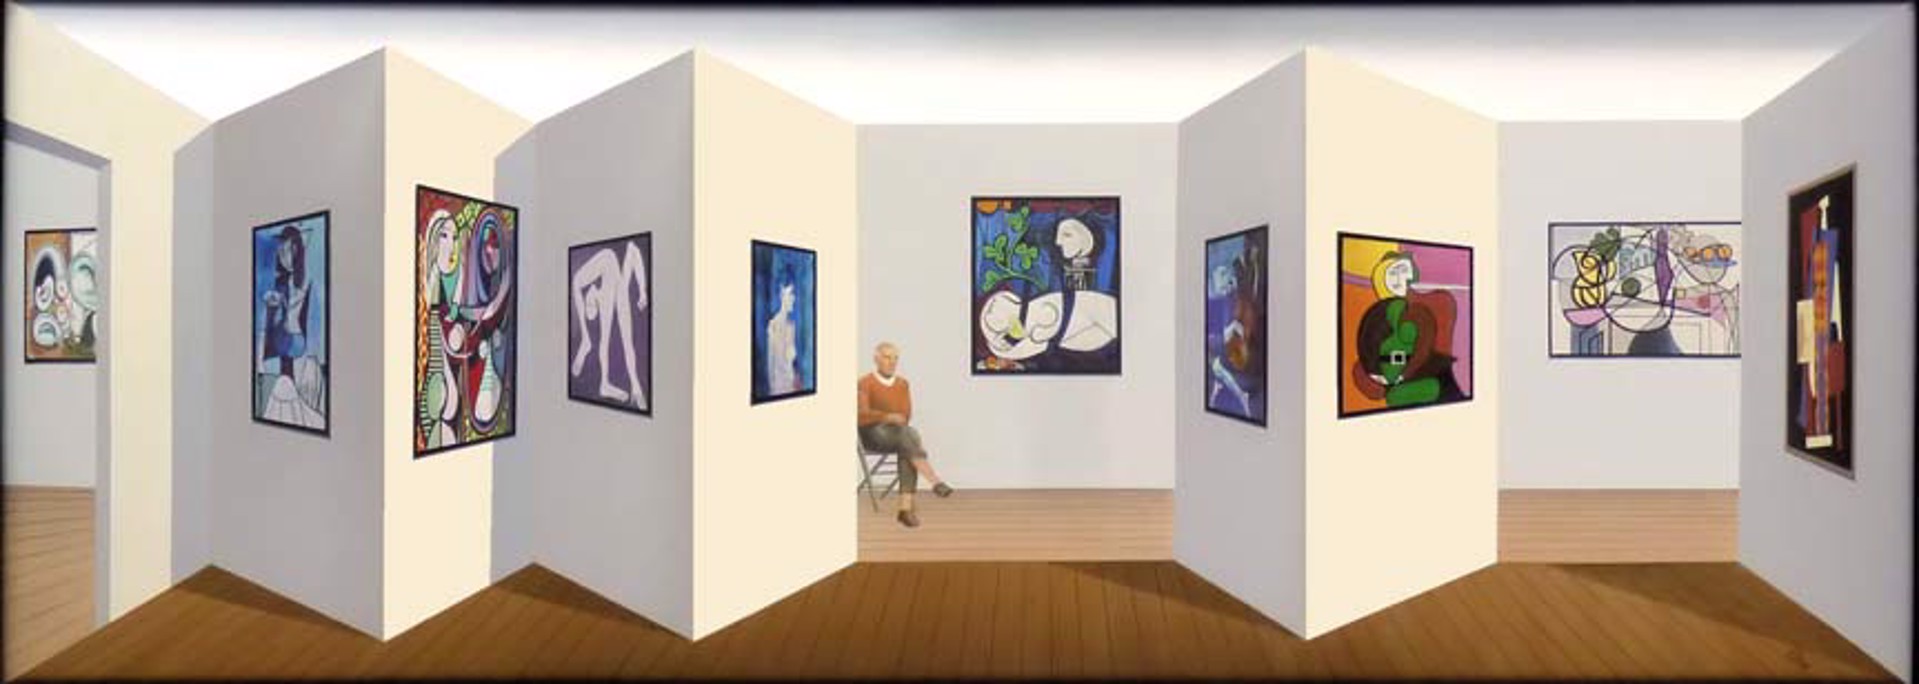 Gallery 92 - Picasso by Peter Roth